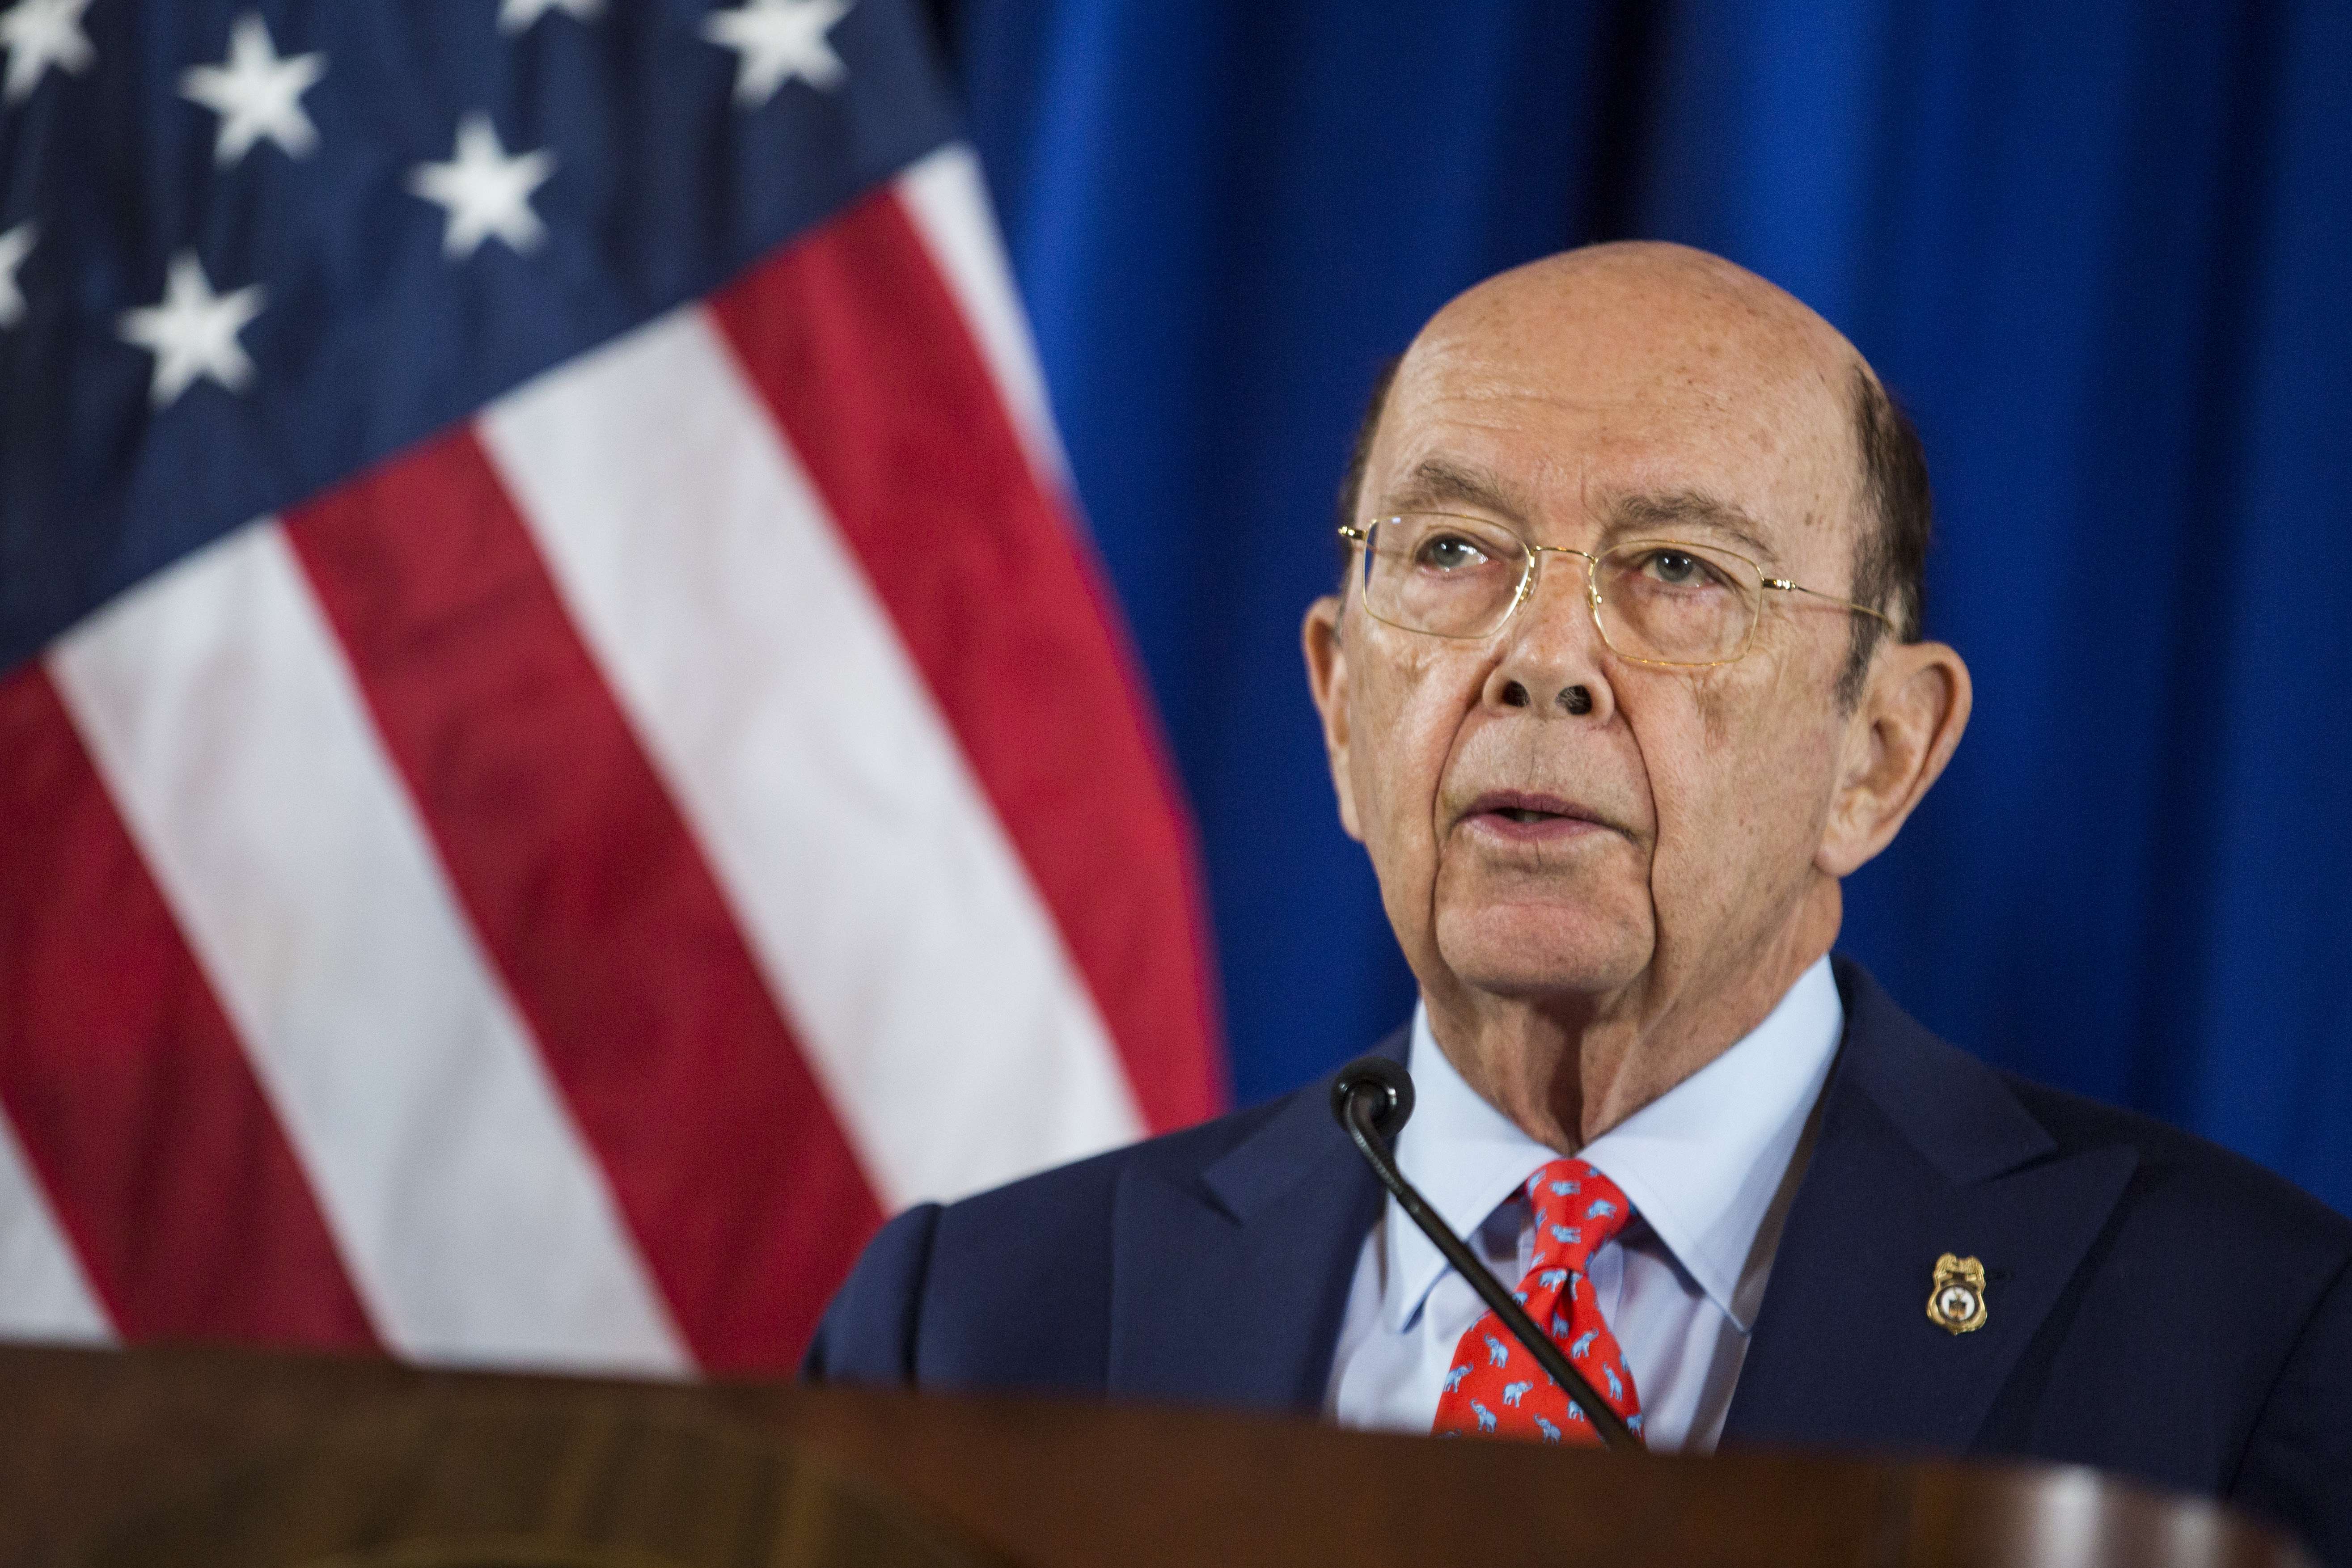 Secretary of Commerce Wilbur Ross says the United States will take a measured and analytical approach to trade decisions. Photo: Bloomberg